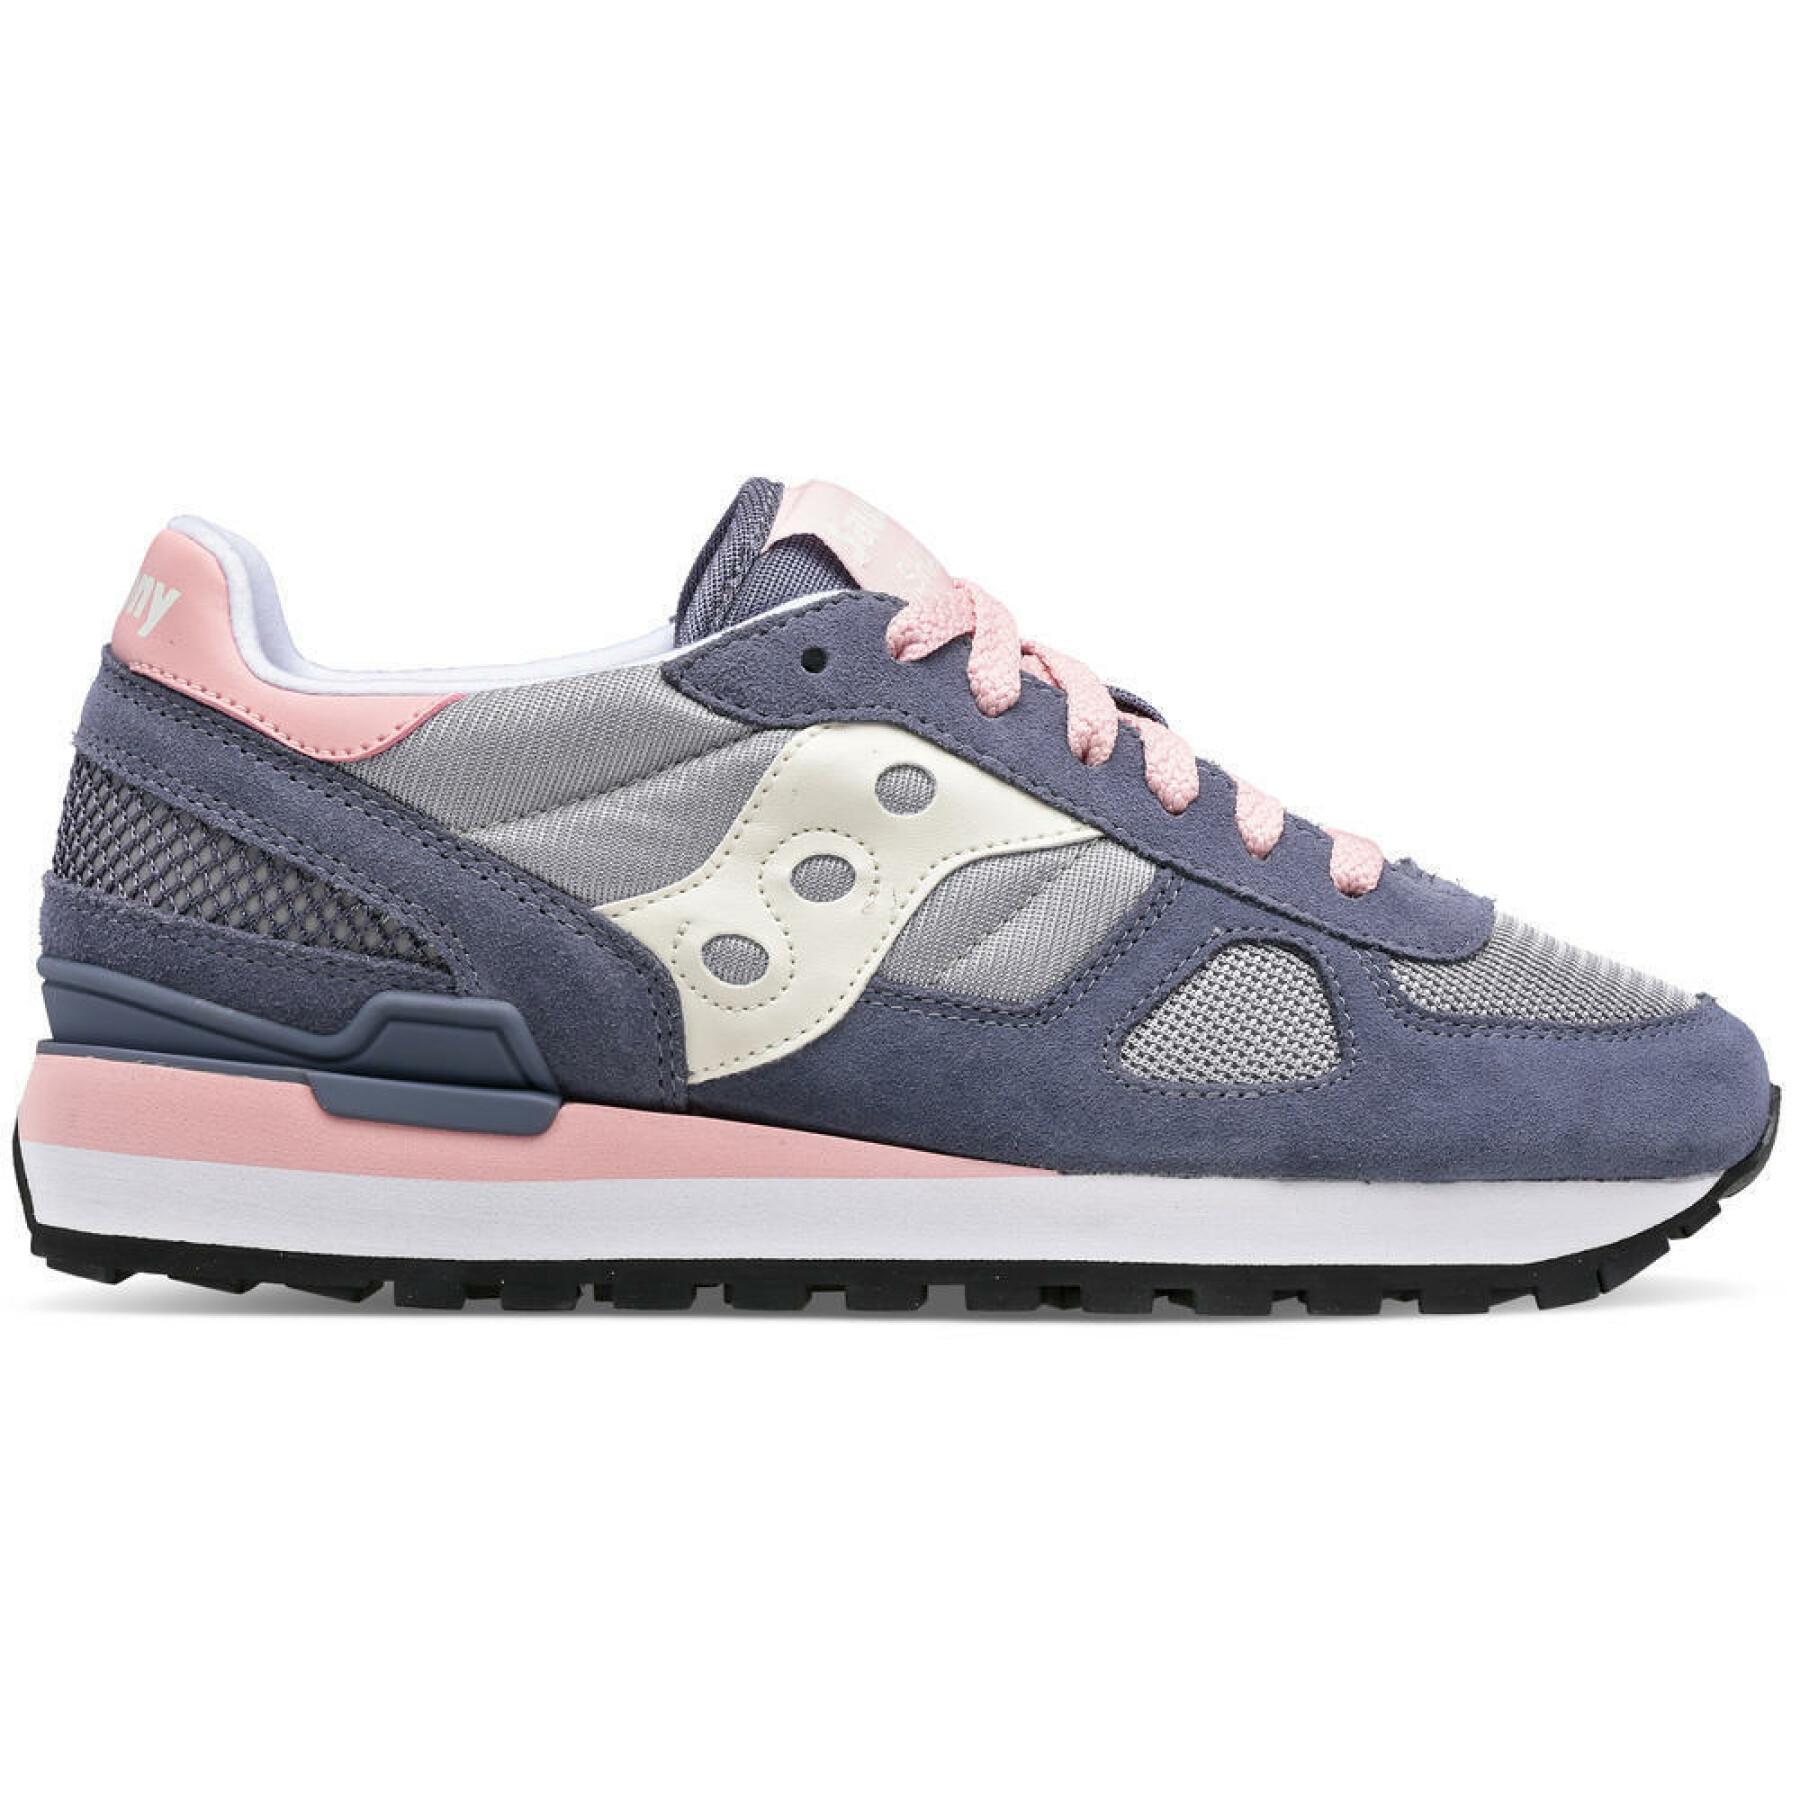 Chaussures femme Saucony Shadow Original - Sneakers - Chaussures